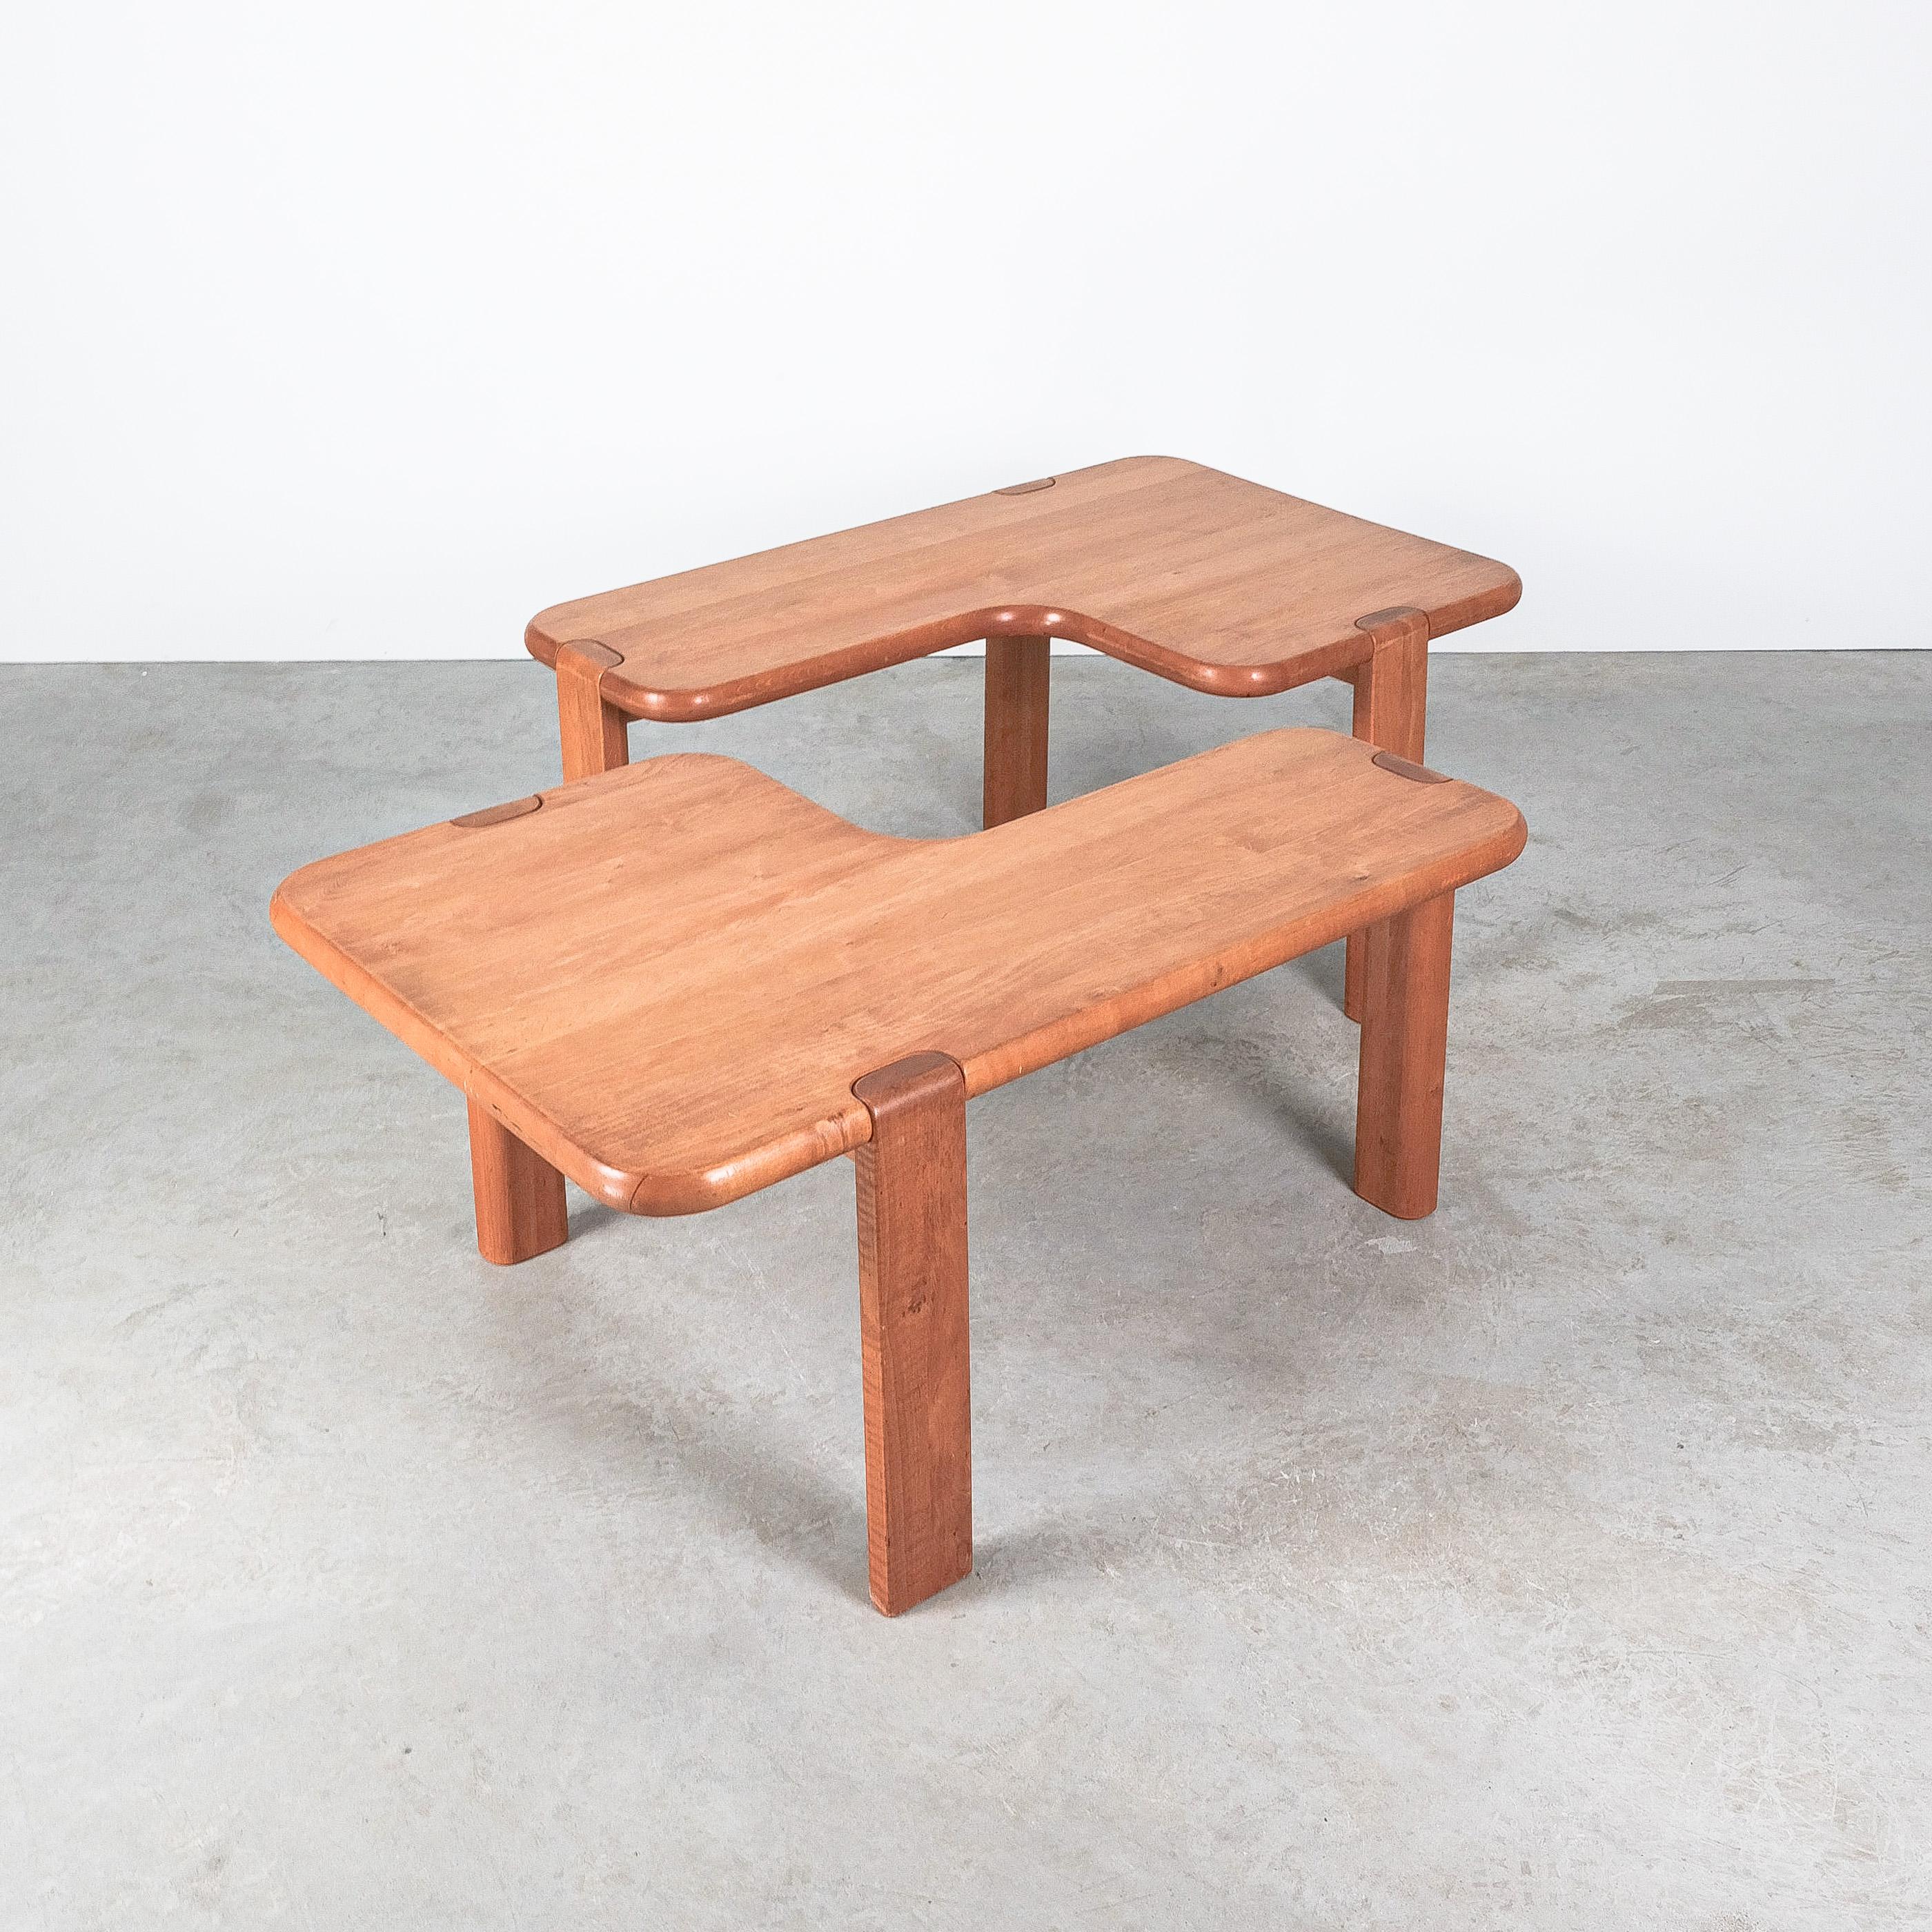 Beautifully preserved danish pine coffee tables, midcentury, labeled 
Dimensions are: 39.3